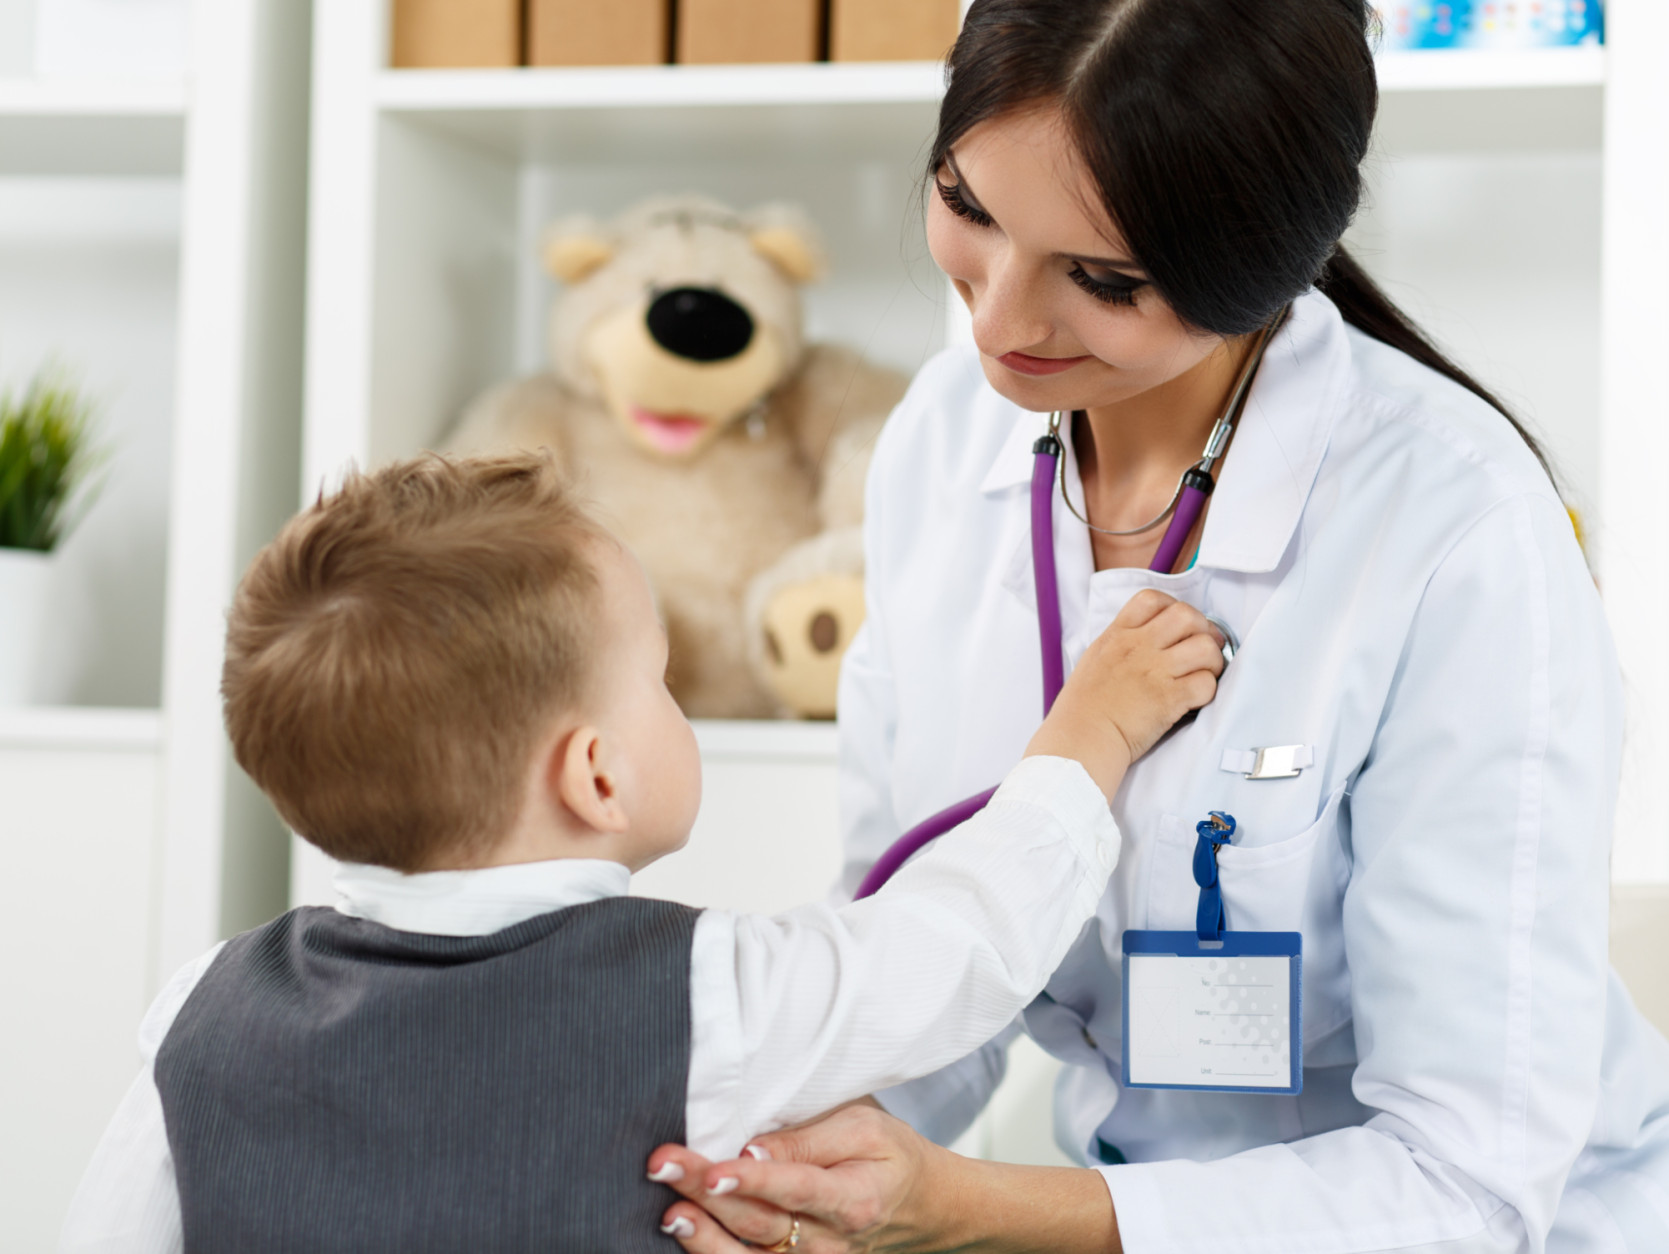 What issues do you want the presidential candidates to address? According to a new poll, a lot of adults want more discussion about children's health. (Thinkstock)